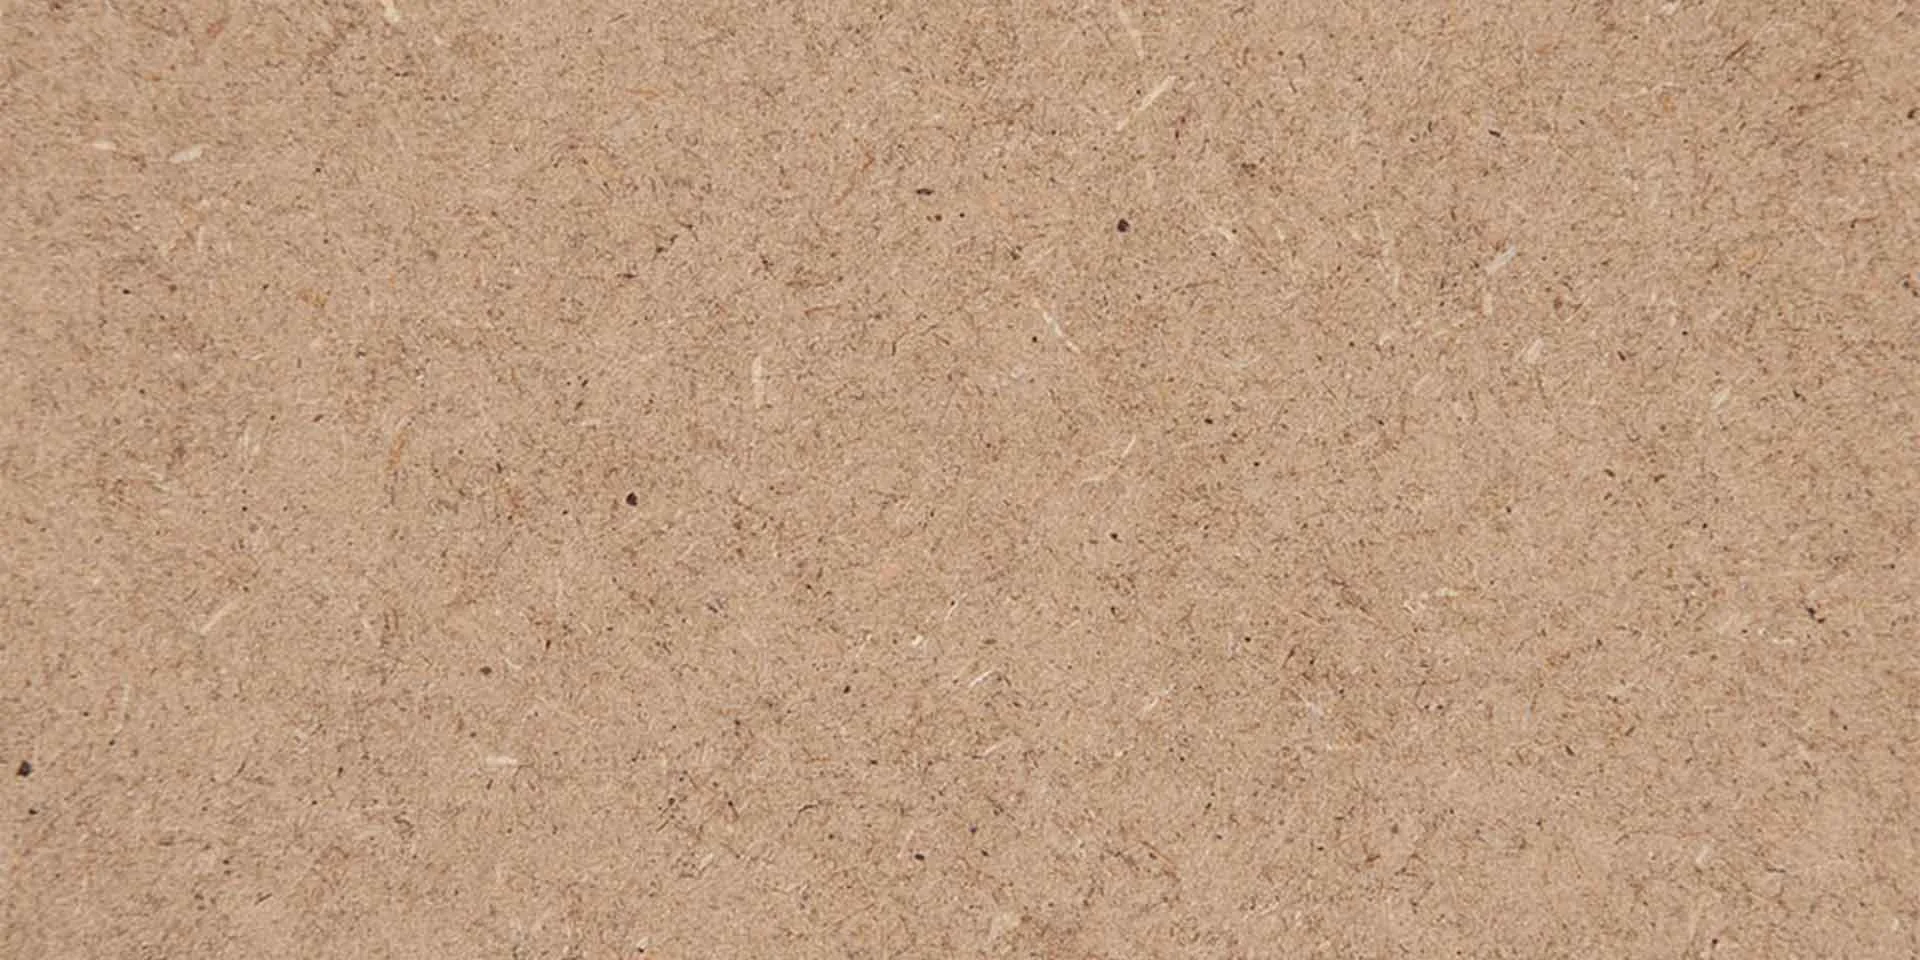 TSFC049 in MDF natural